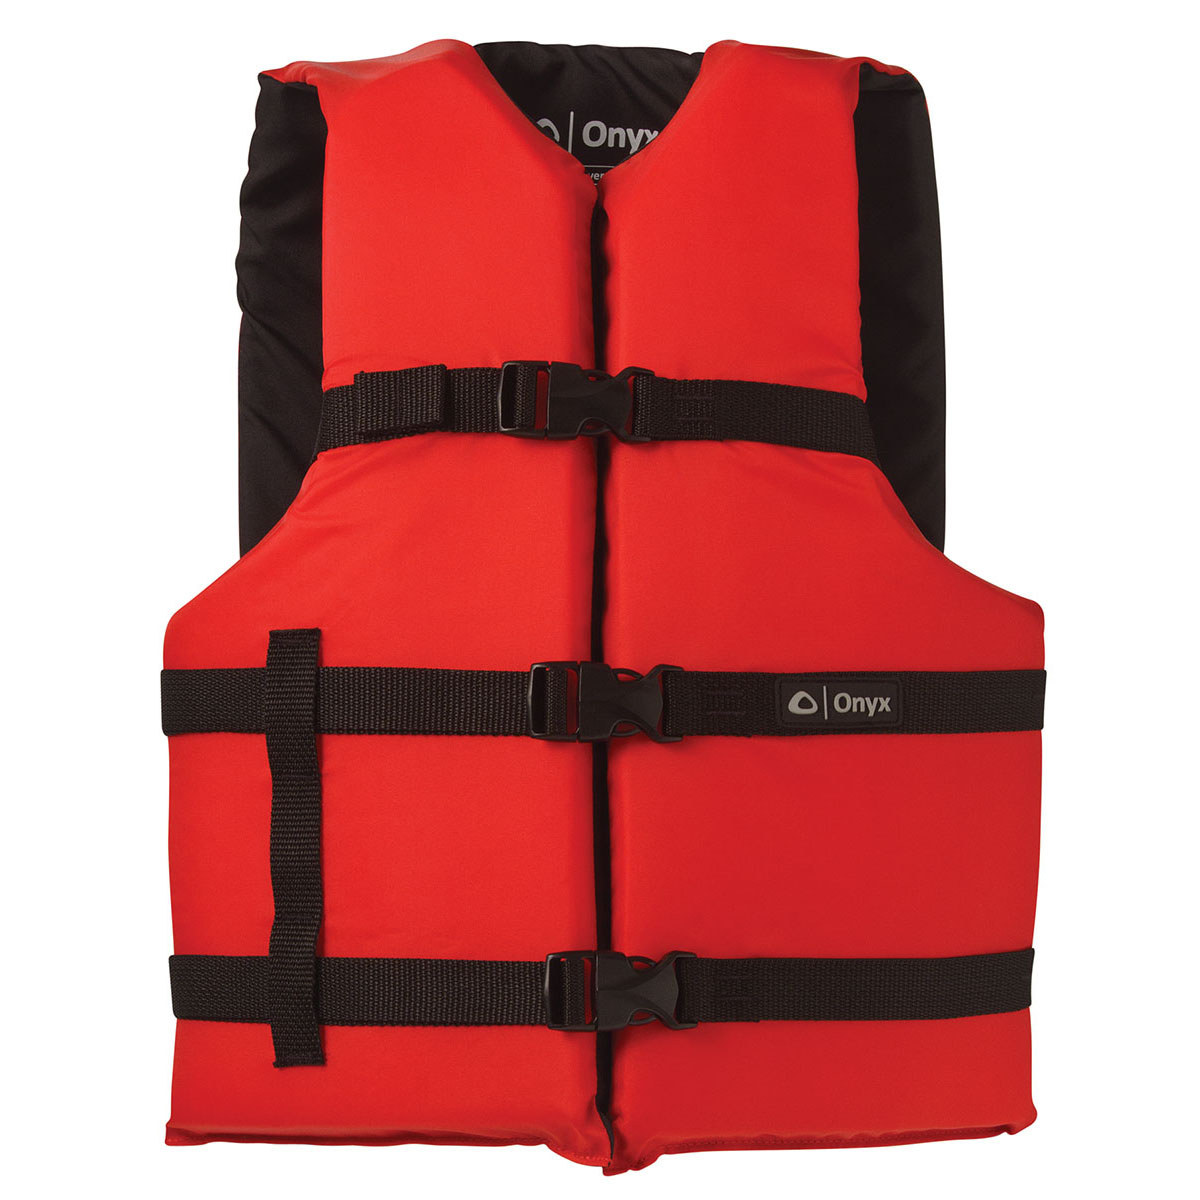 Details about   Outdoors Multi-function Adults Life Jacket Vest Lifesaving Waistcoat with Pocket 